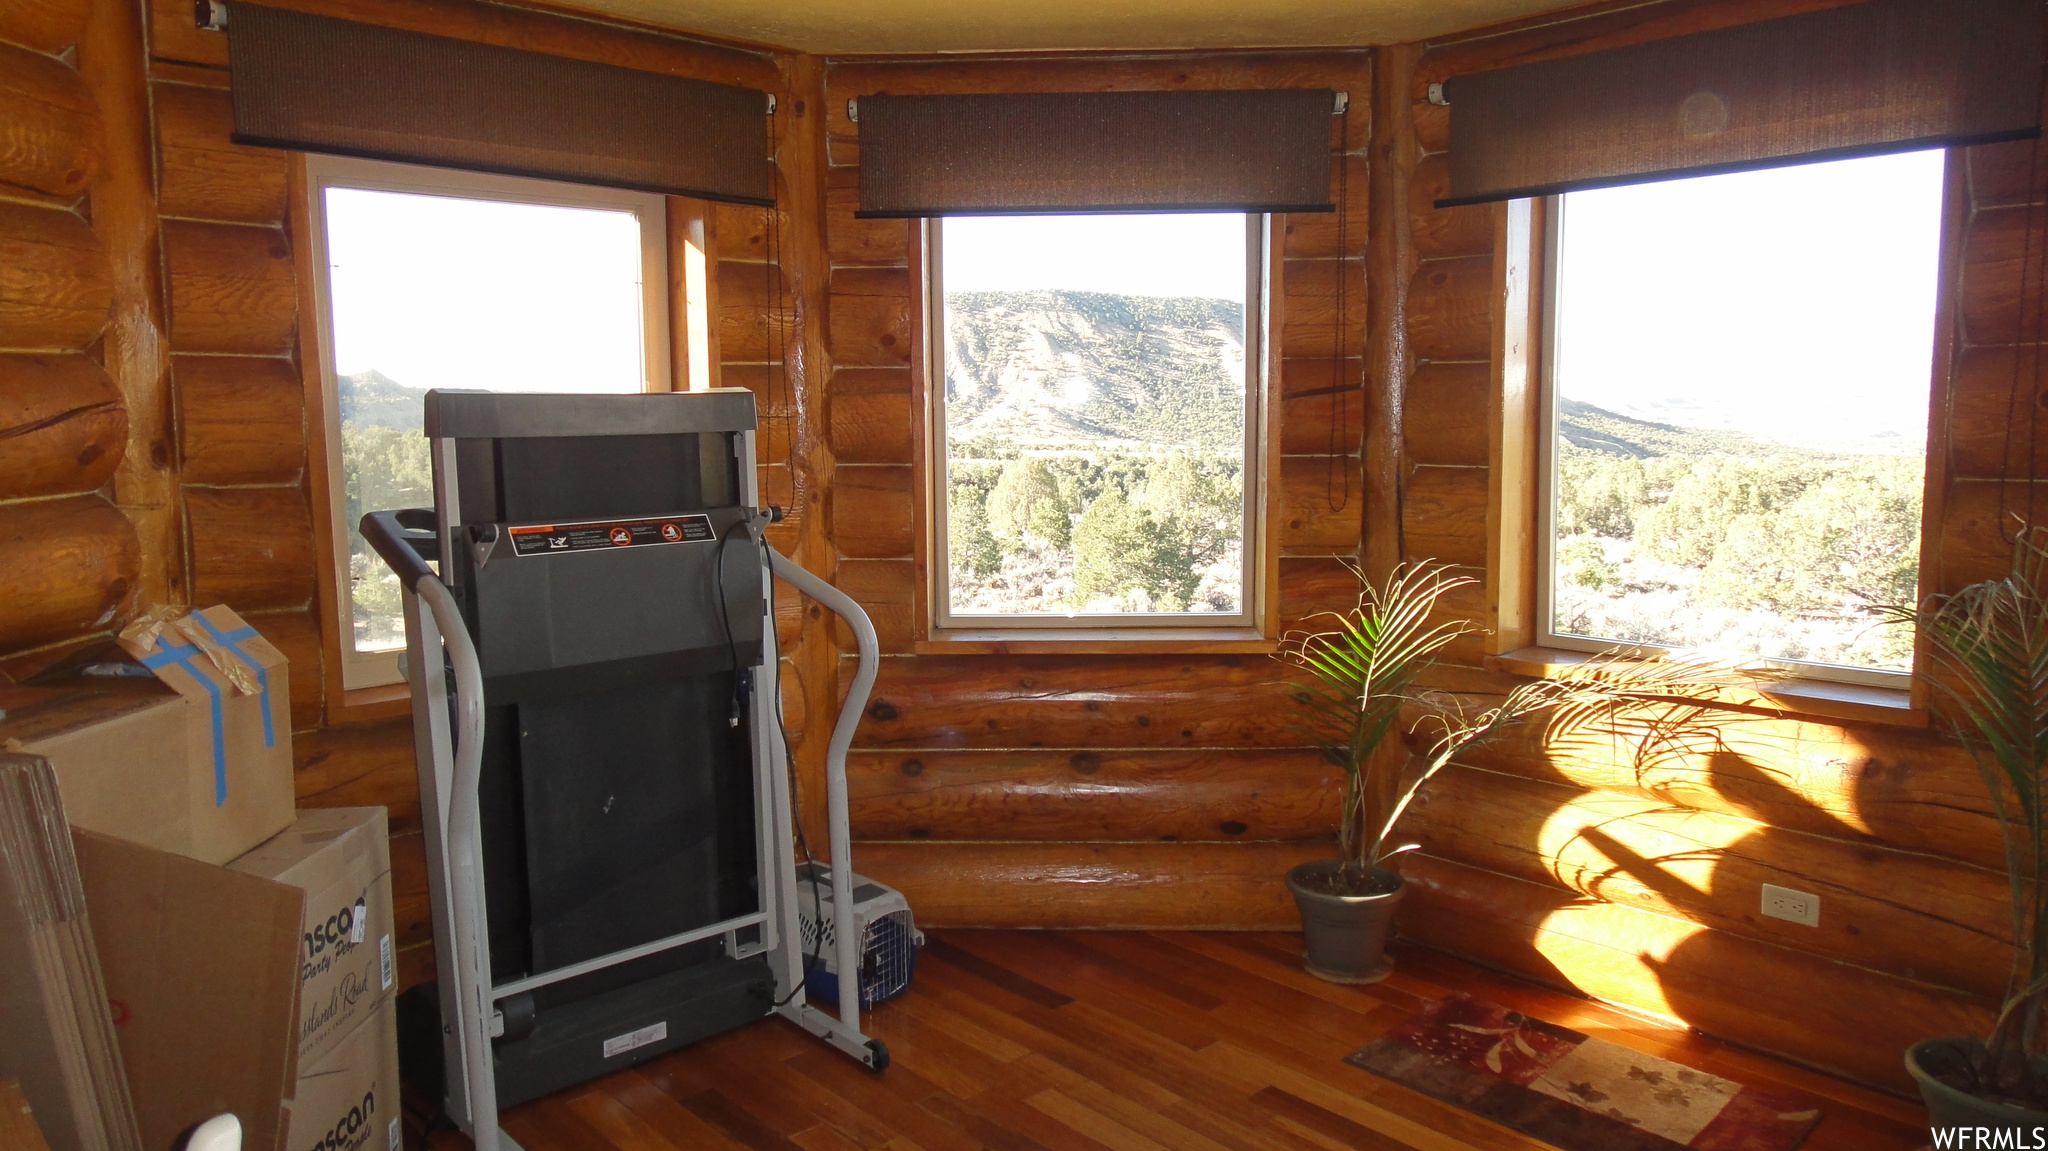 Exercise area featuring dark hardwood floors and rustic walls. Could also be an additional bedroom.